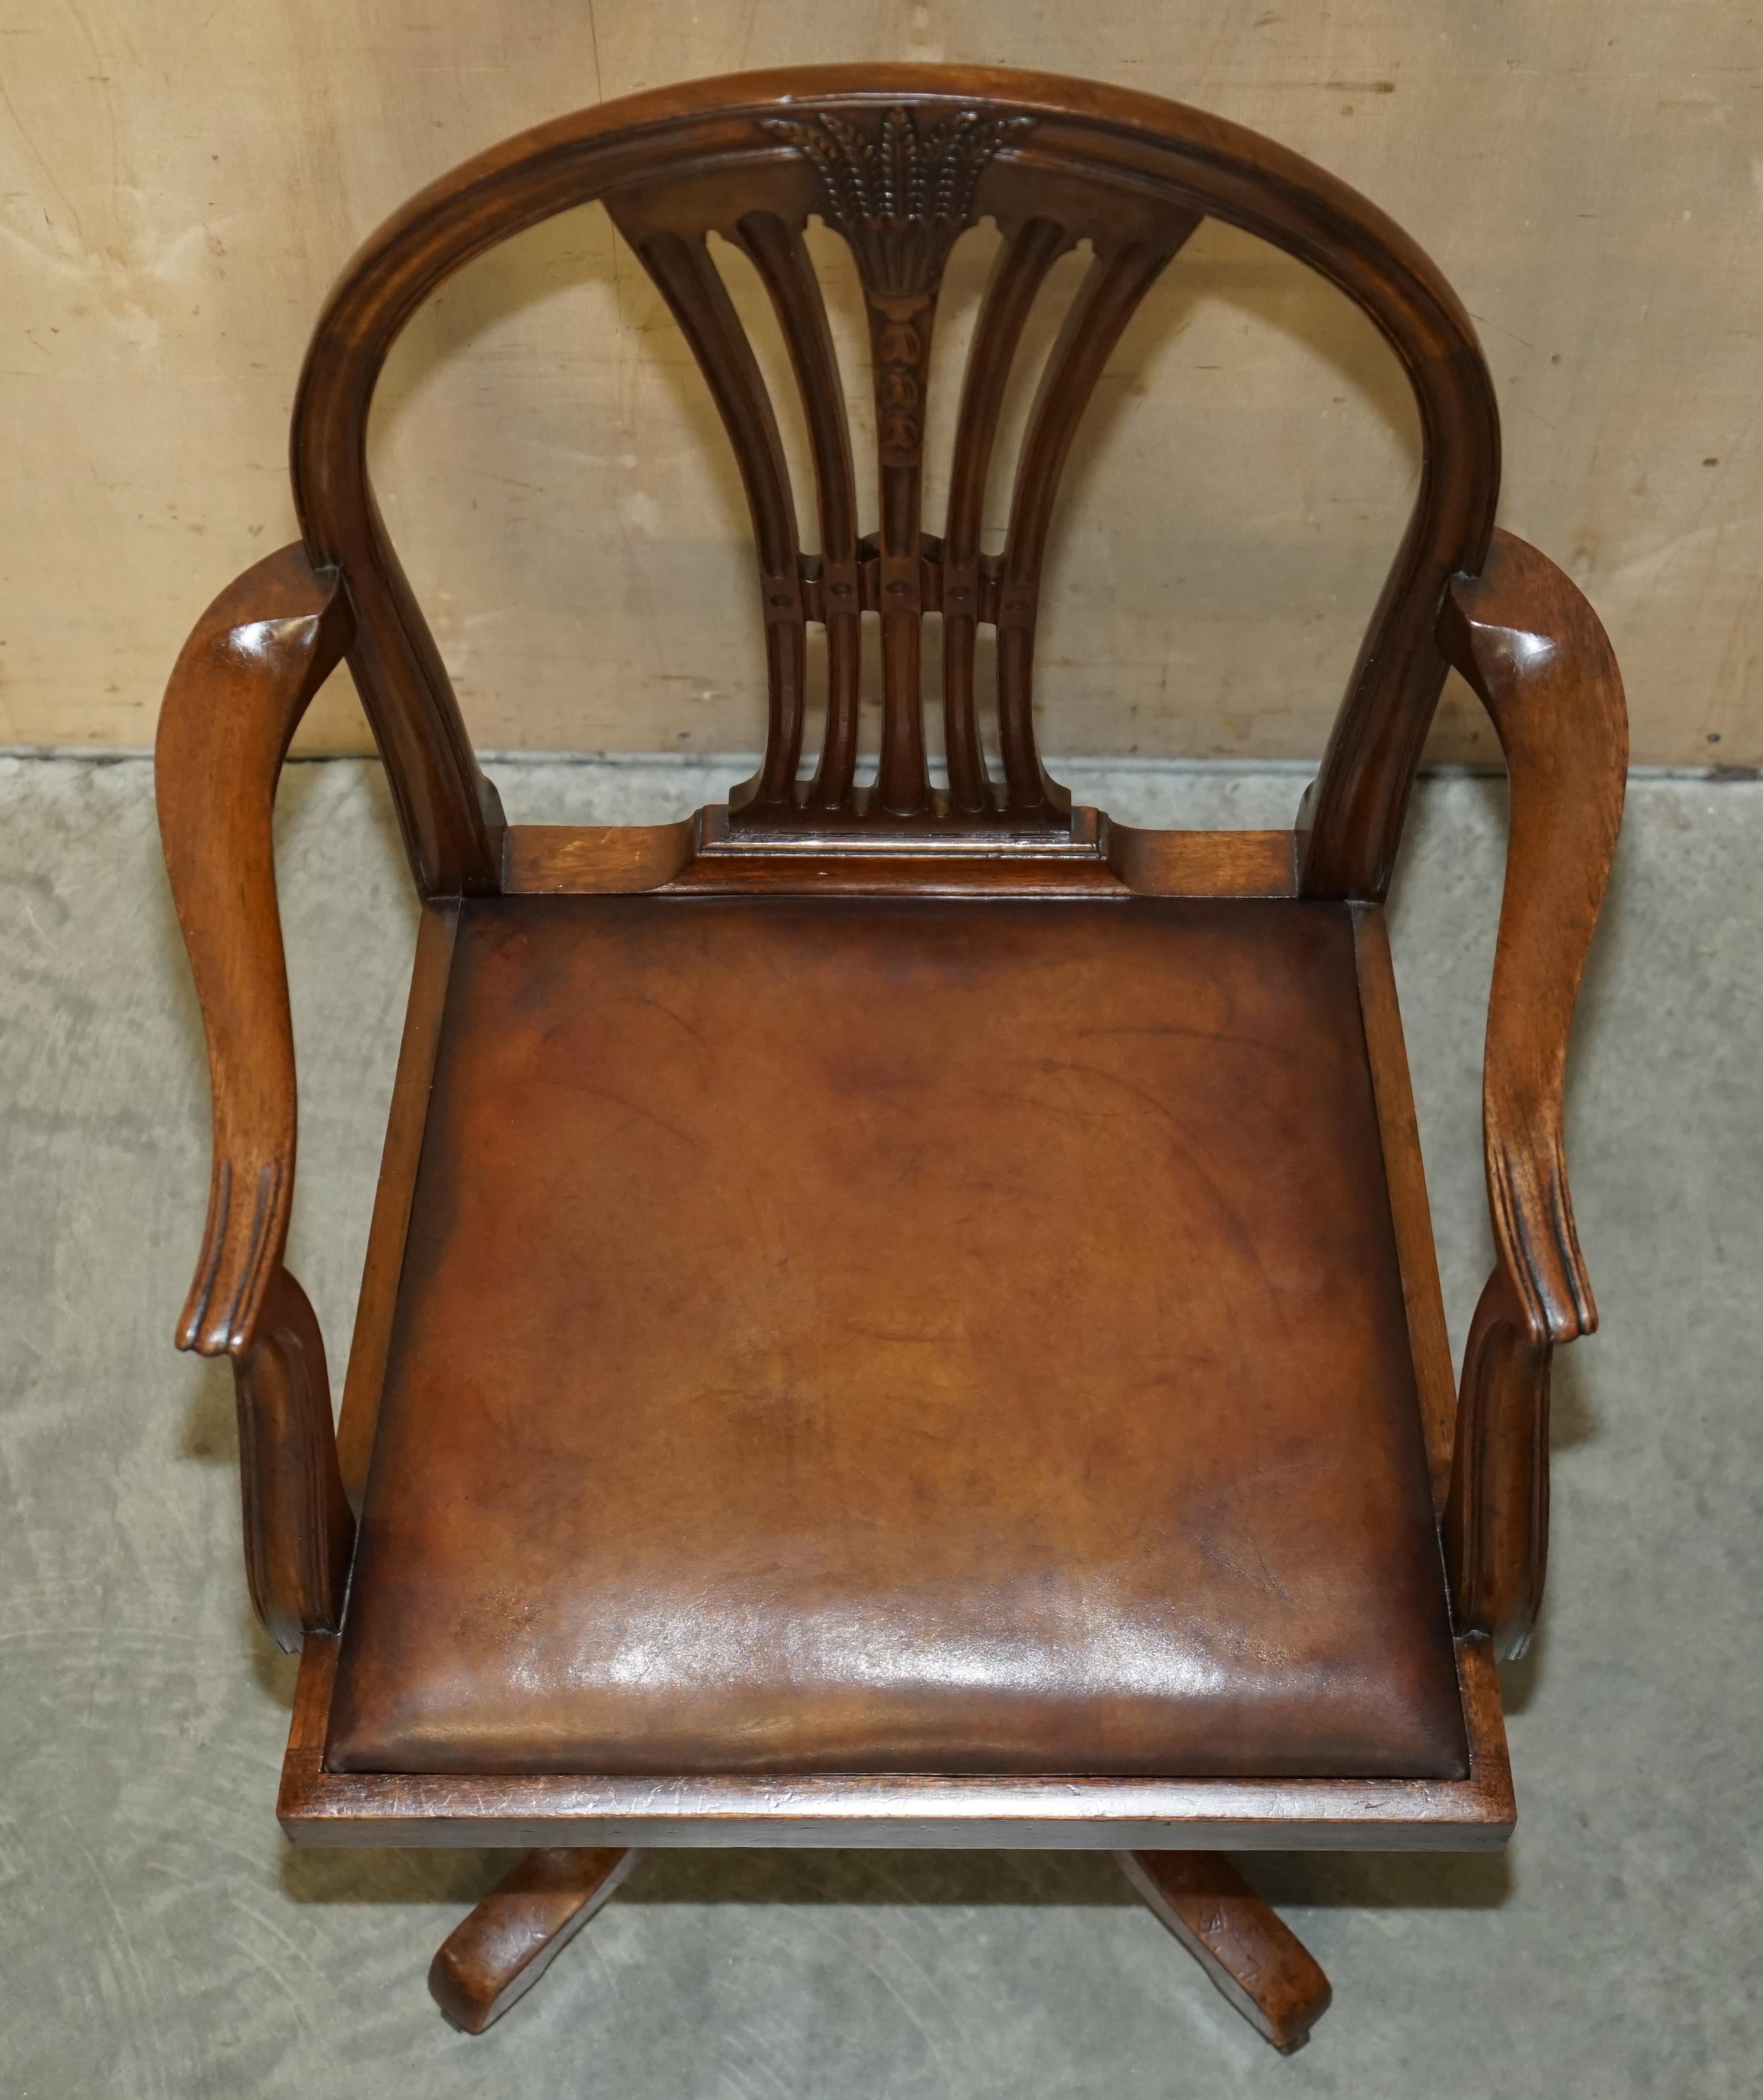 Unique Antique 1880 George Hepplewhite Wheatgrass Captains Chair Brown Leather For Sale 8